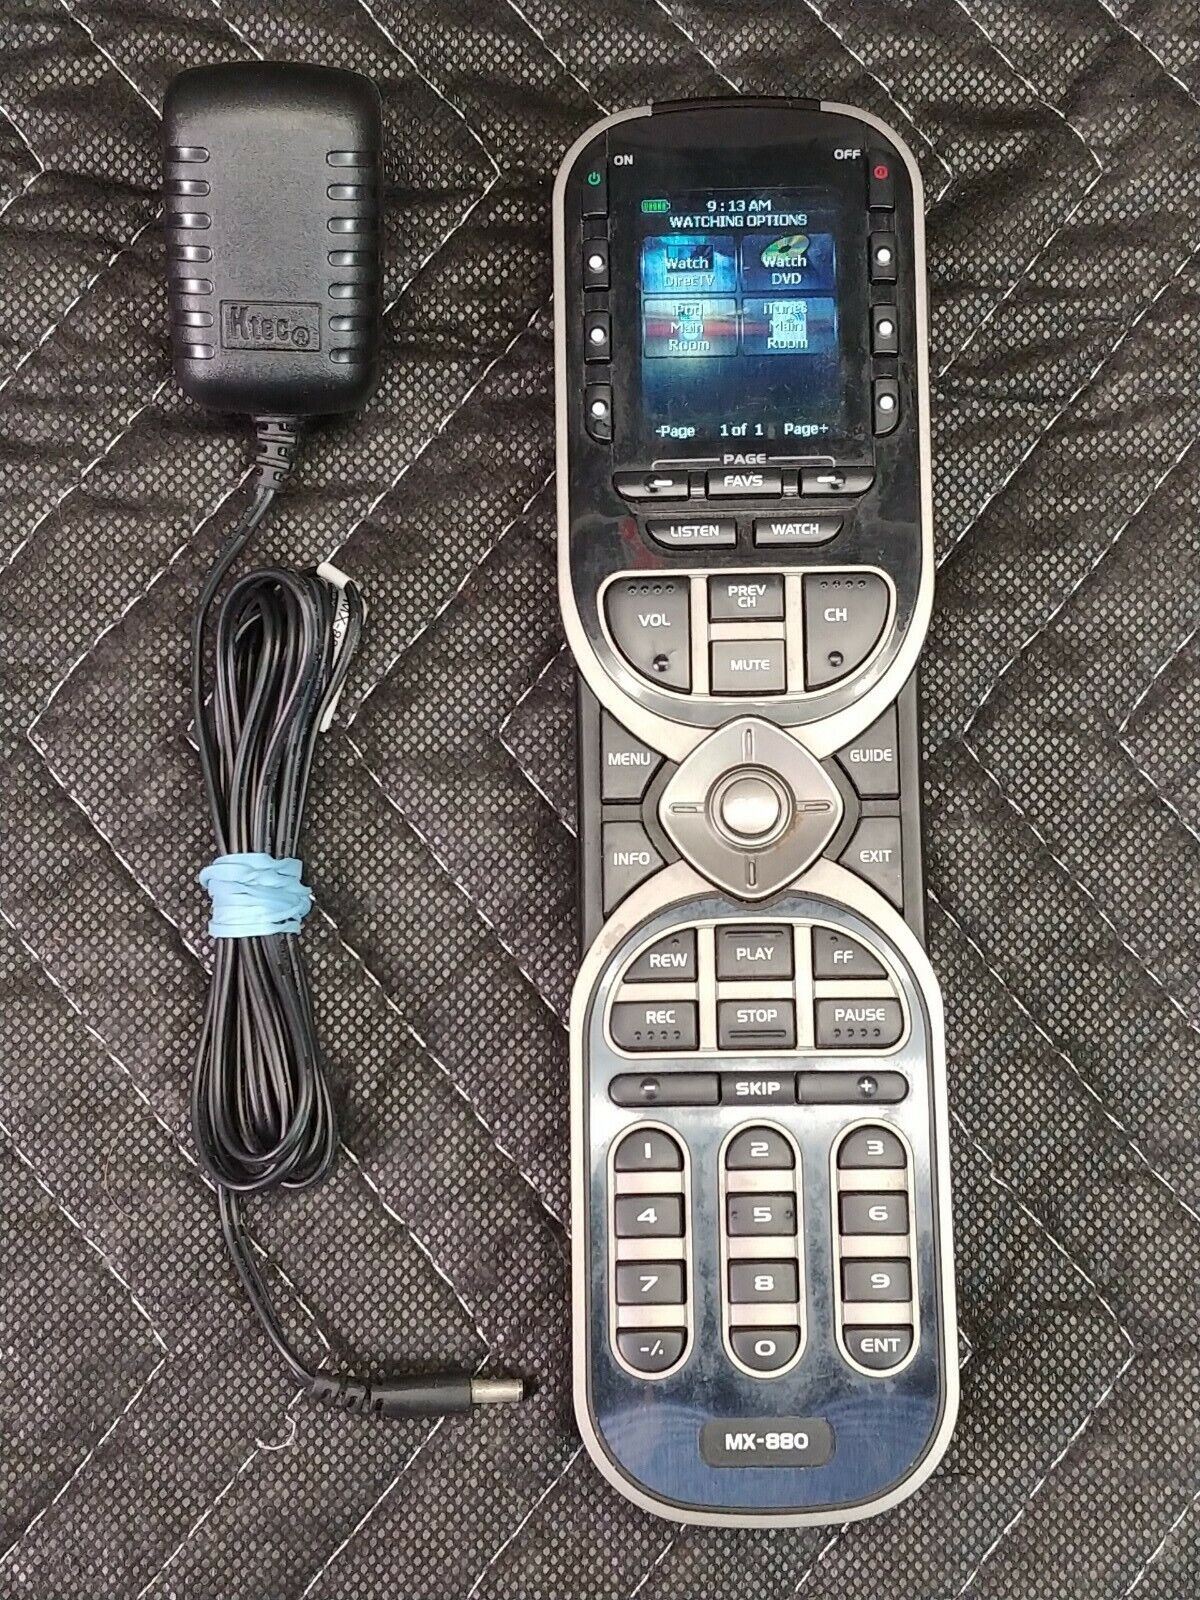 MX-880 Universal Remote Control With Battery And Charger